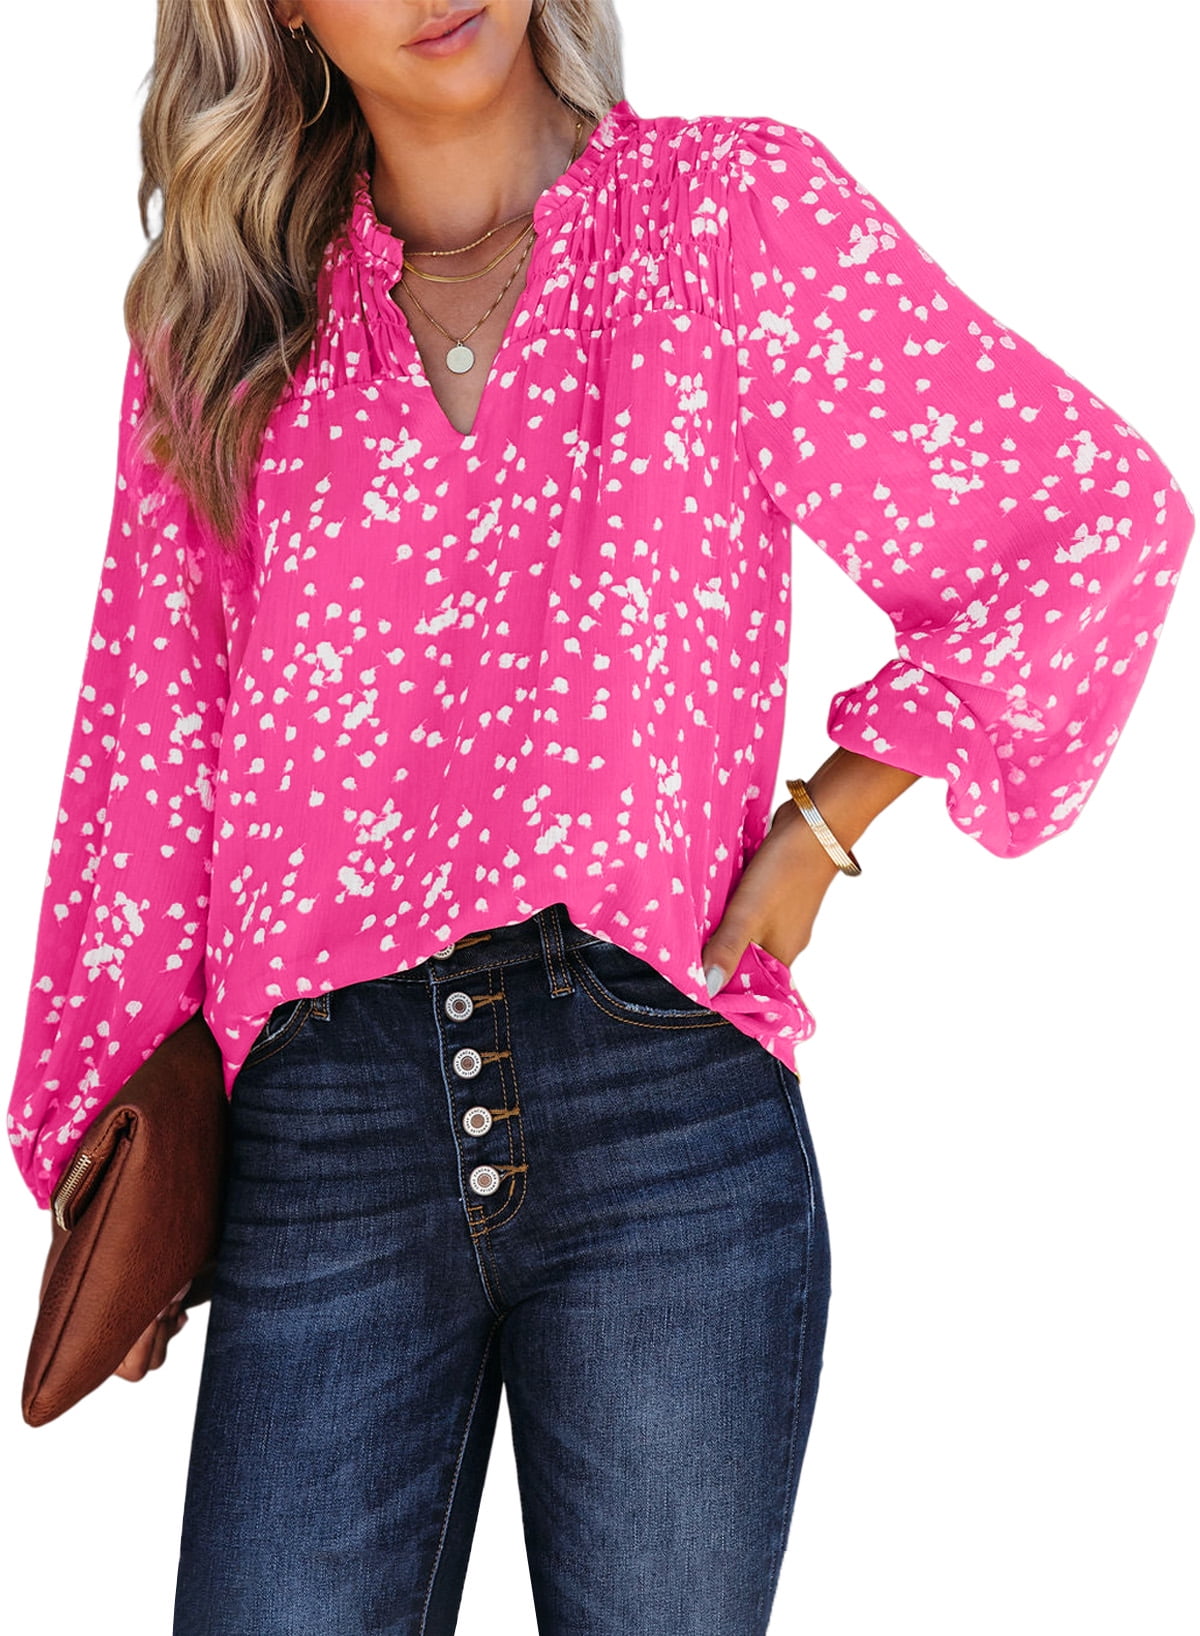 EVALESS Blouses for Women Smocked Casual V Neck Long Sleeve Floral ...